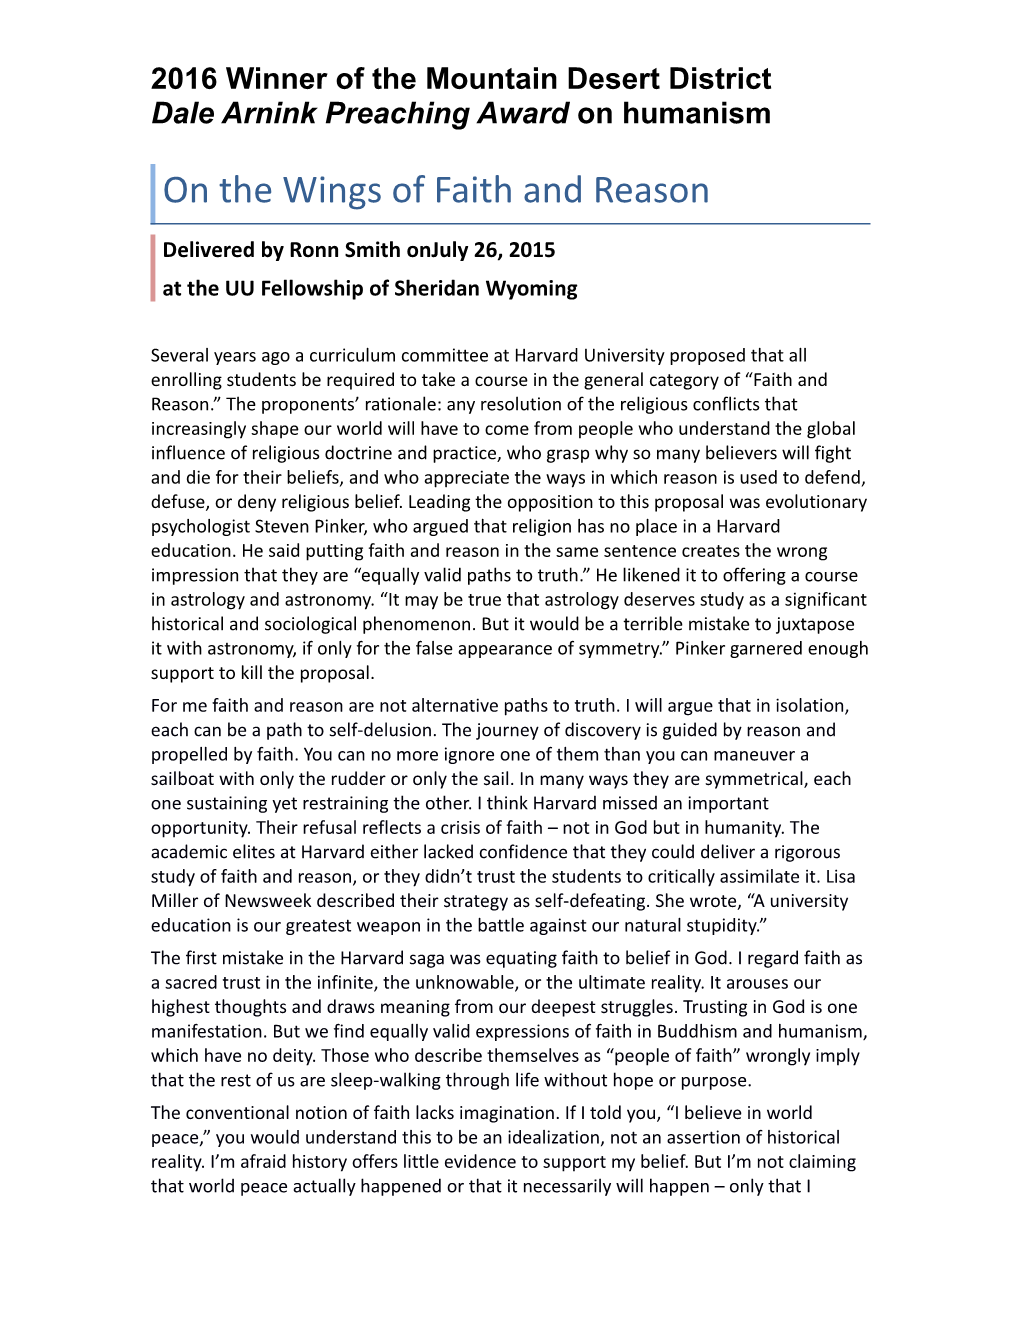 On the Wings of Faith and Reason